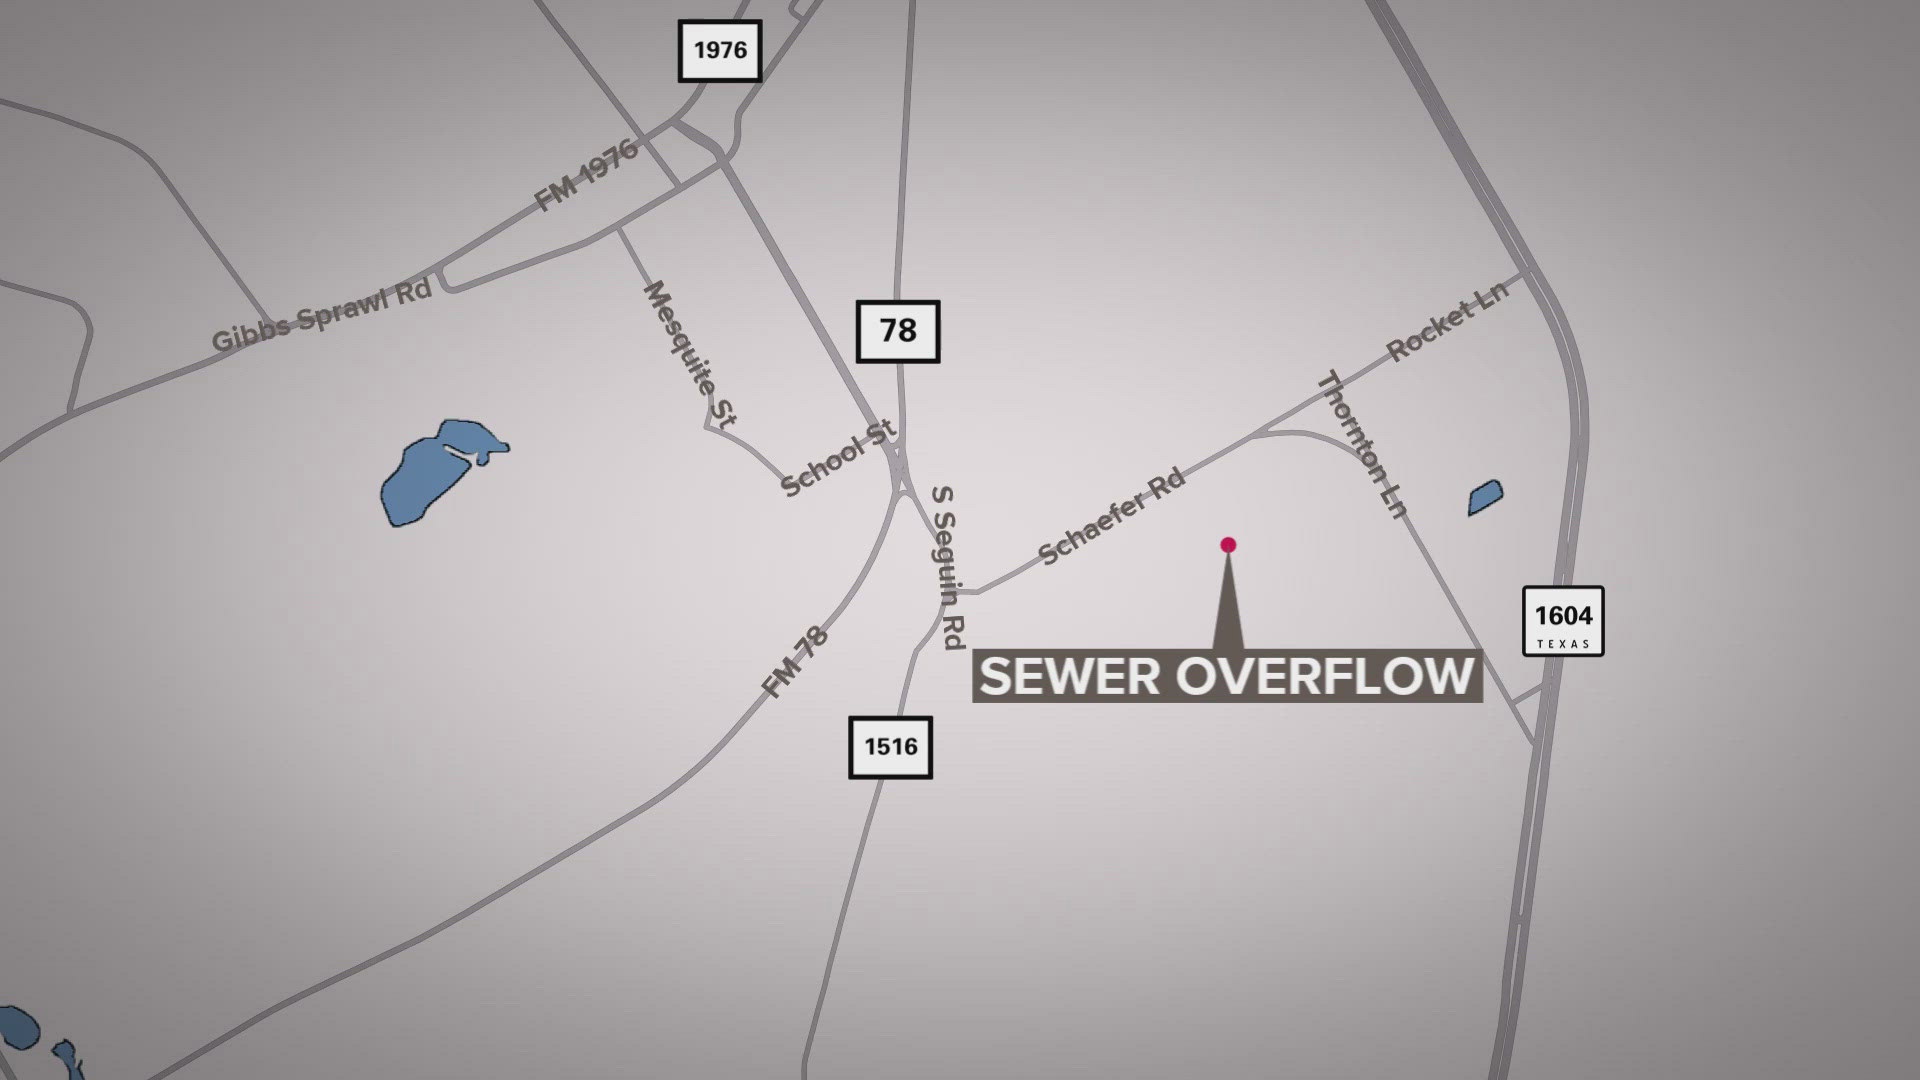 San Antonio River Authority working to clean up a sewer overflow incident